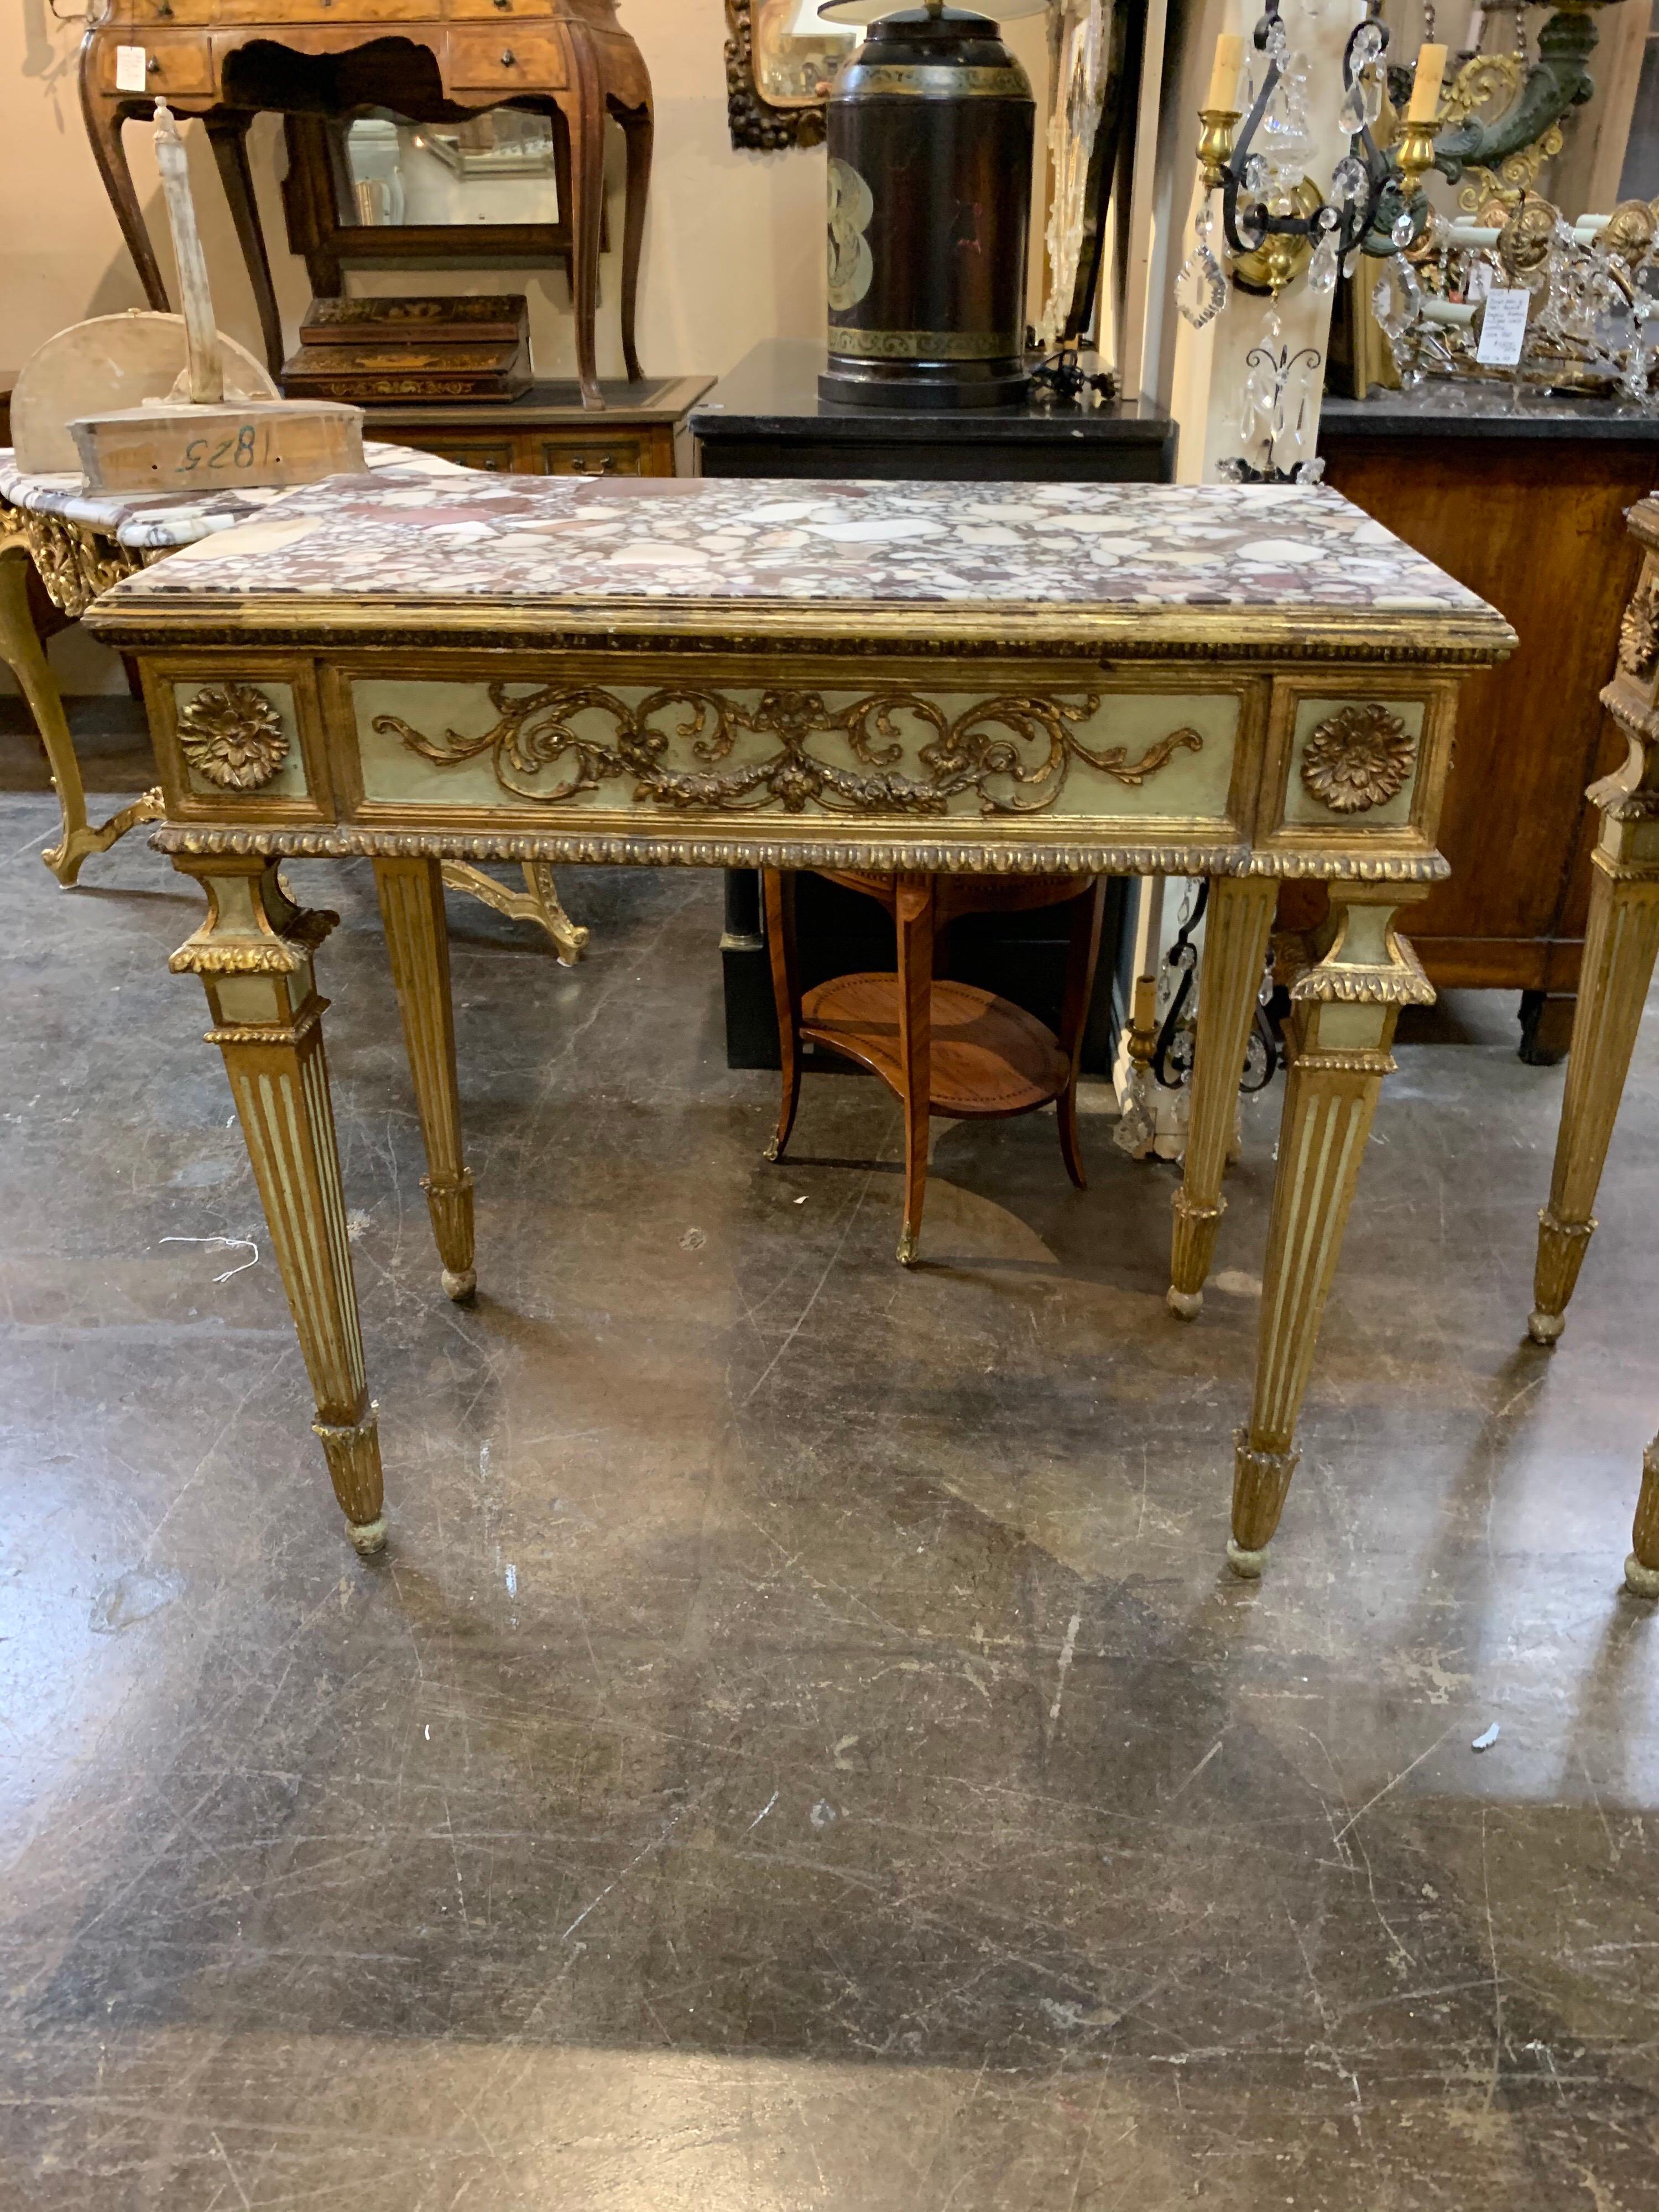 Fabulous pair of Italian neoclassical carved and painted consoles with beautiful Breccia Violetta marble. Outstanding carving and gilt on these. Absolutely stunning!